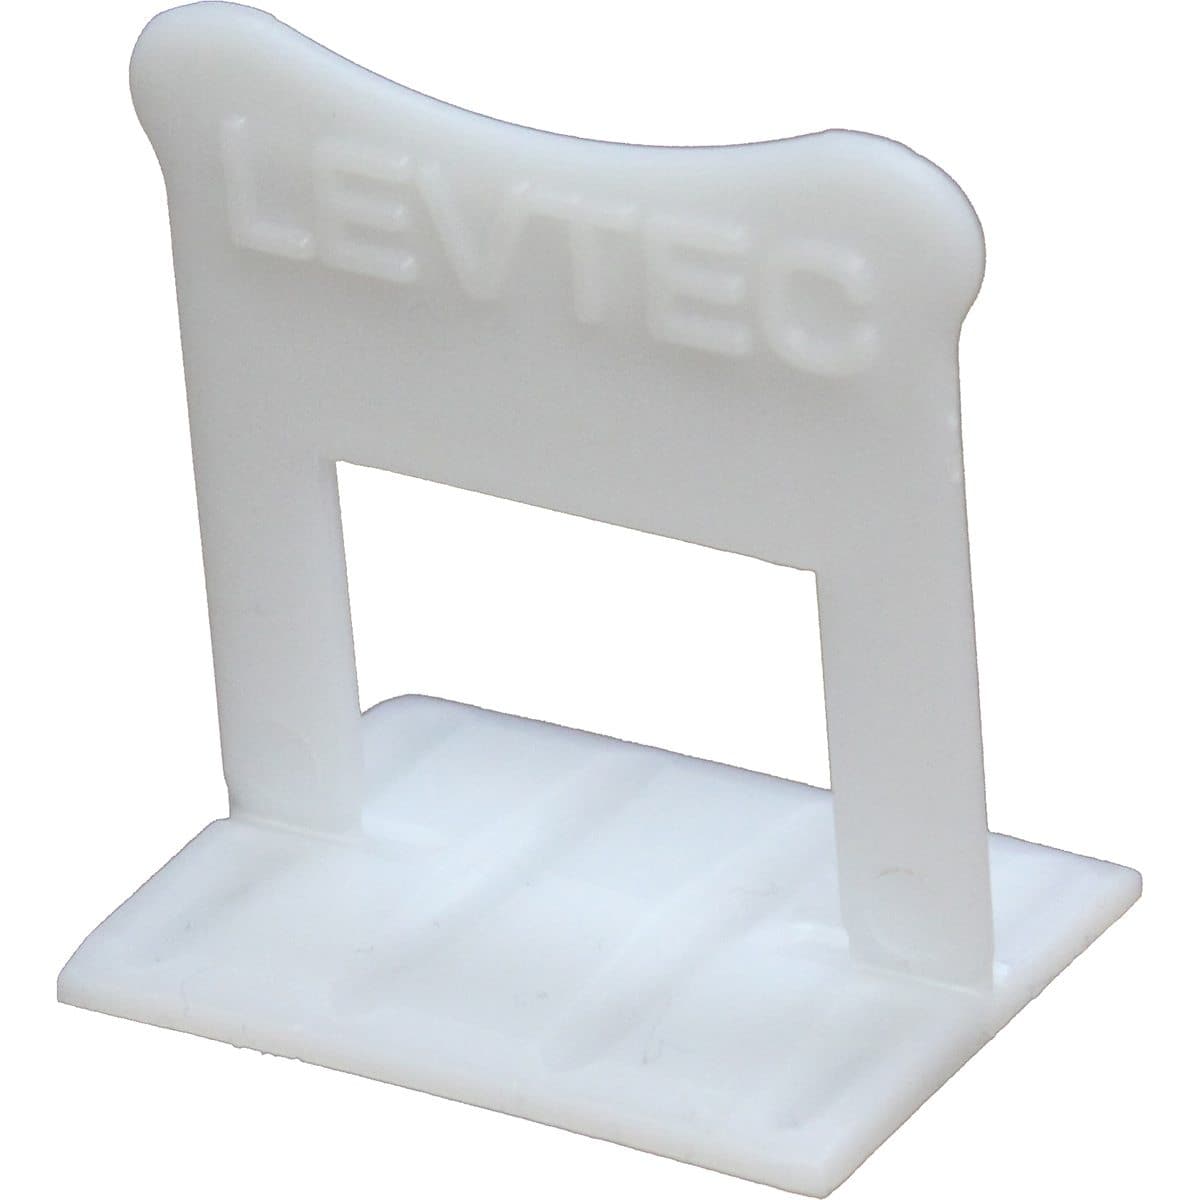 Levtec Tile Levelling System - RTC Products